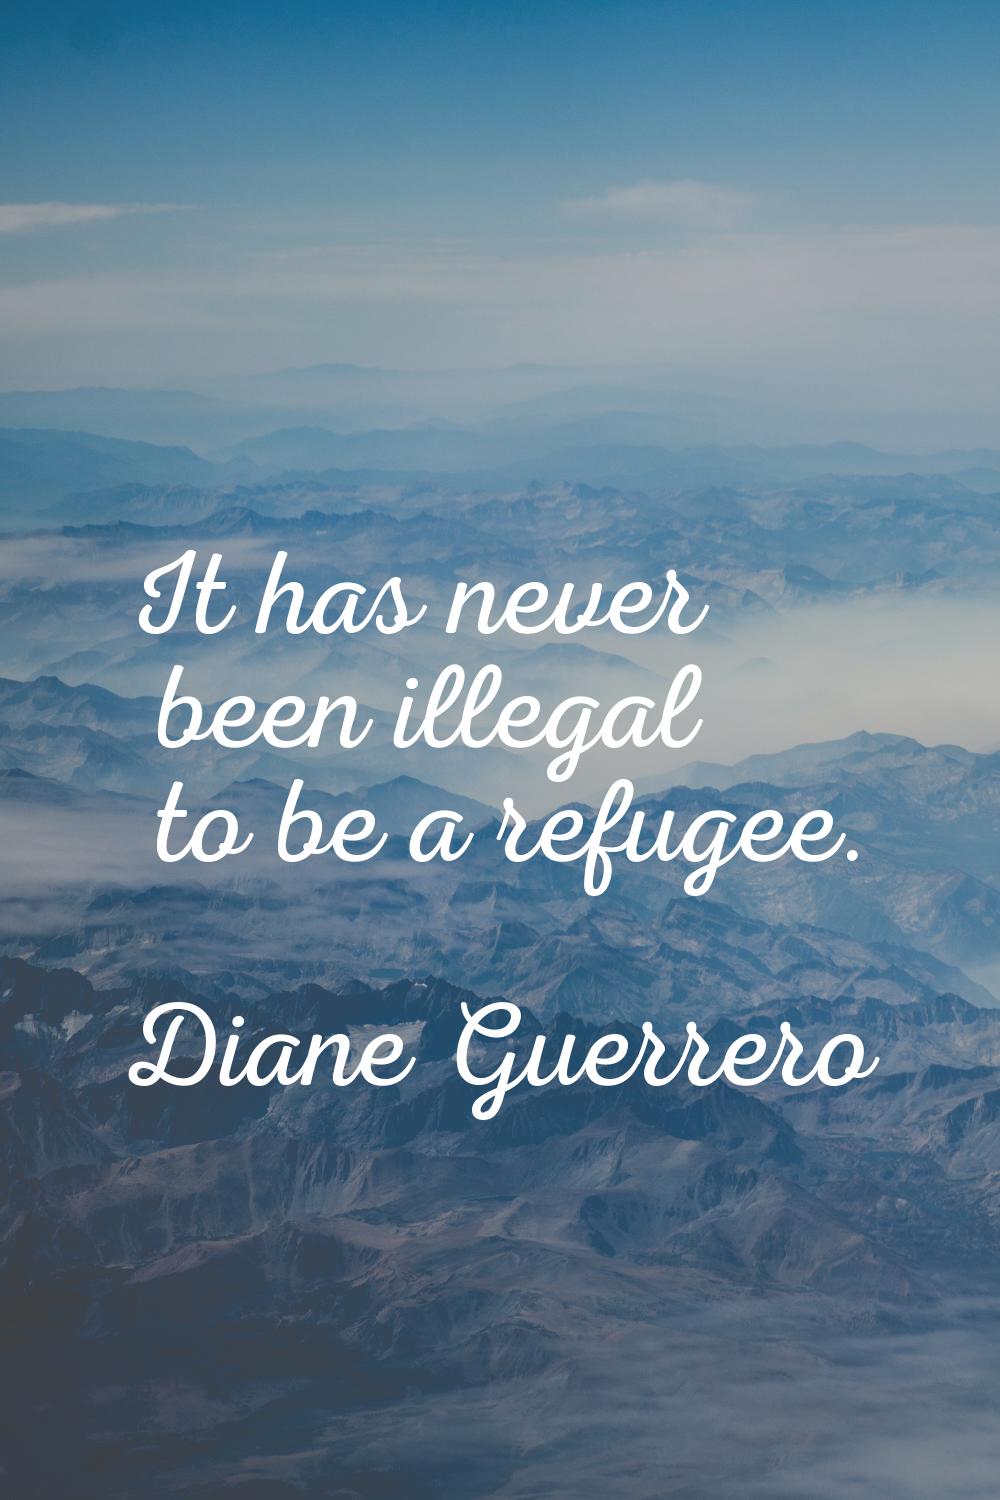 It has never been illegal to be a refugee.